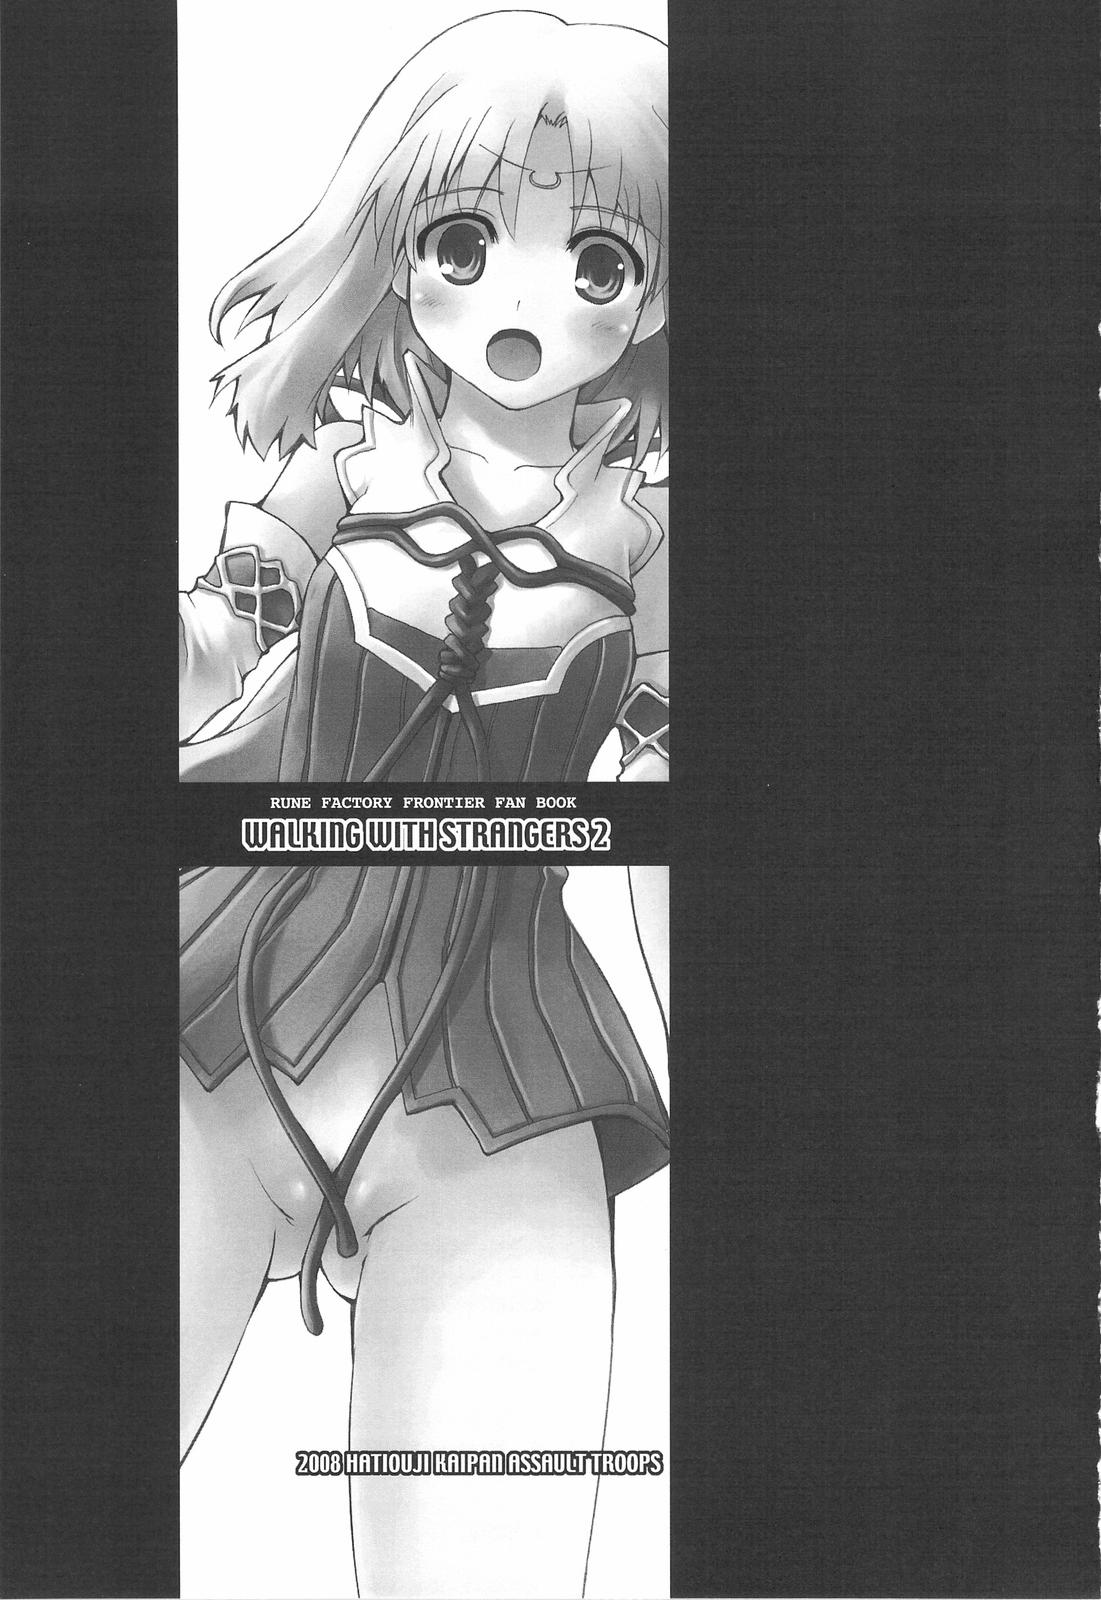 Hot Teen WALKING WITH STRANGERS 2 - Rune factory Prostituta - Page 2